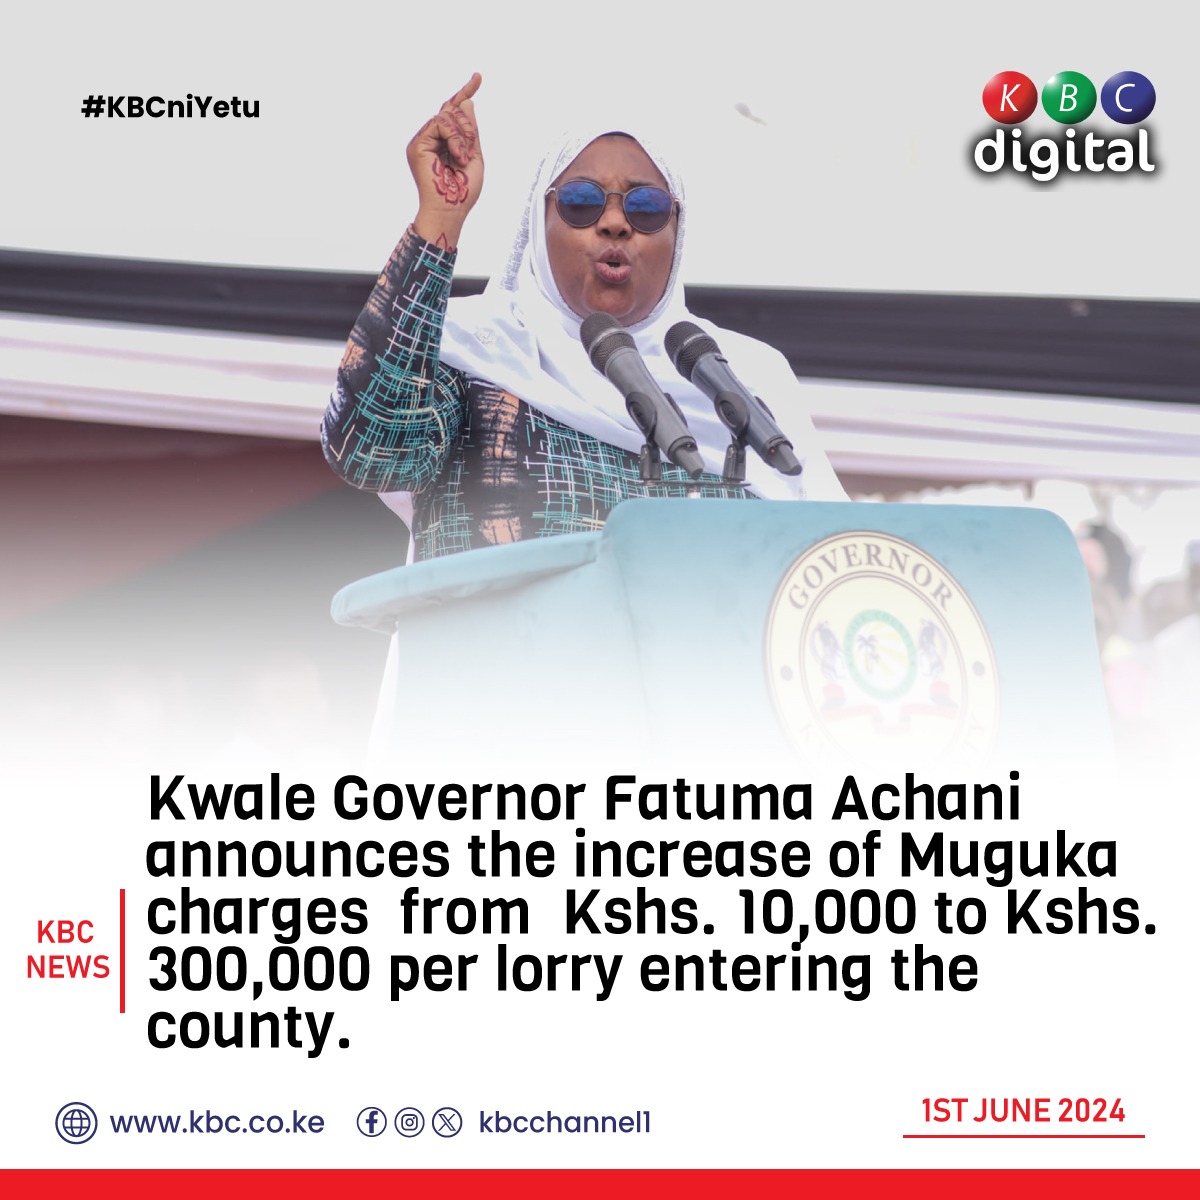 Kwale Governor Fatuma Achani announces the increase of Muguka charges from Kshs. 10,000 to Kshs. 300,000 per lorry entering the county. #KBCniYetu ^RO